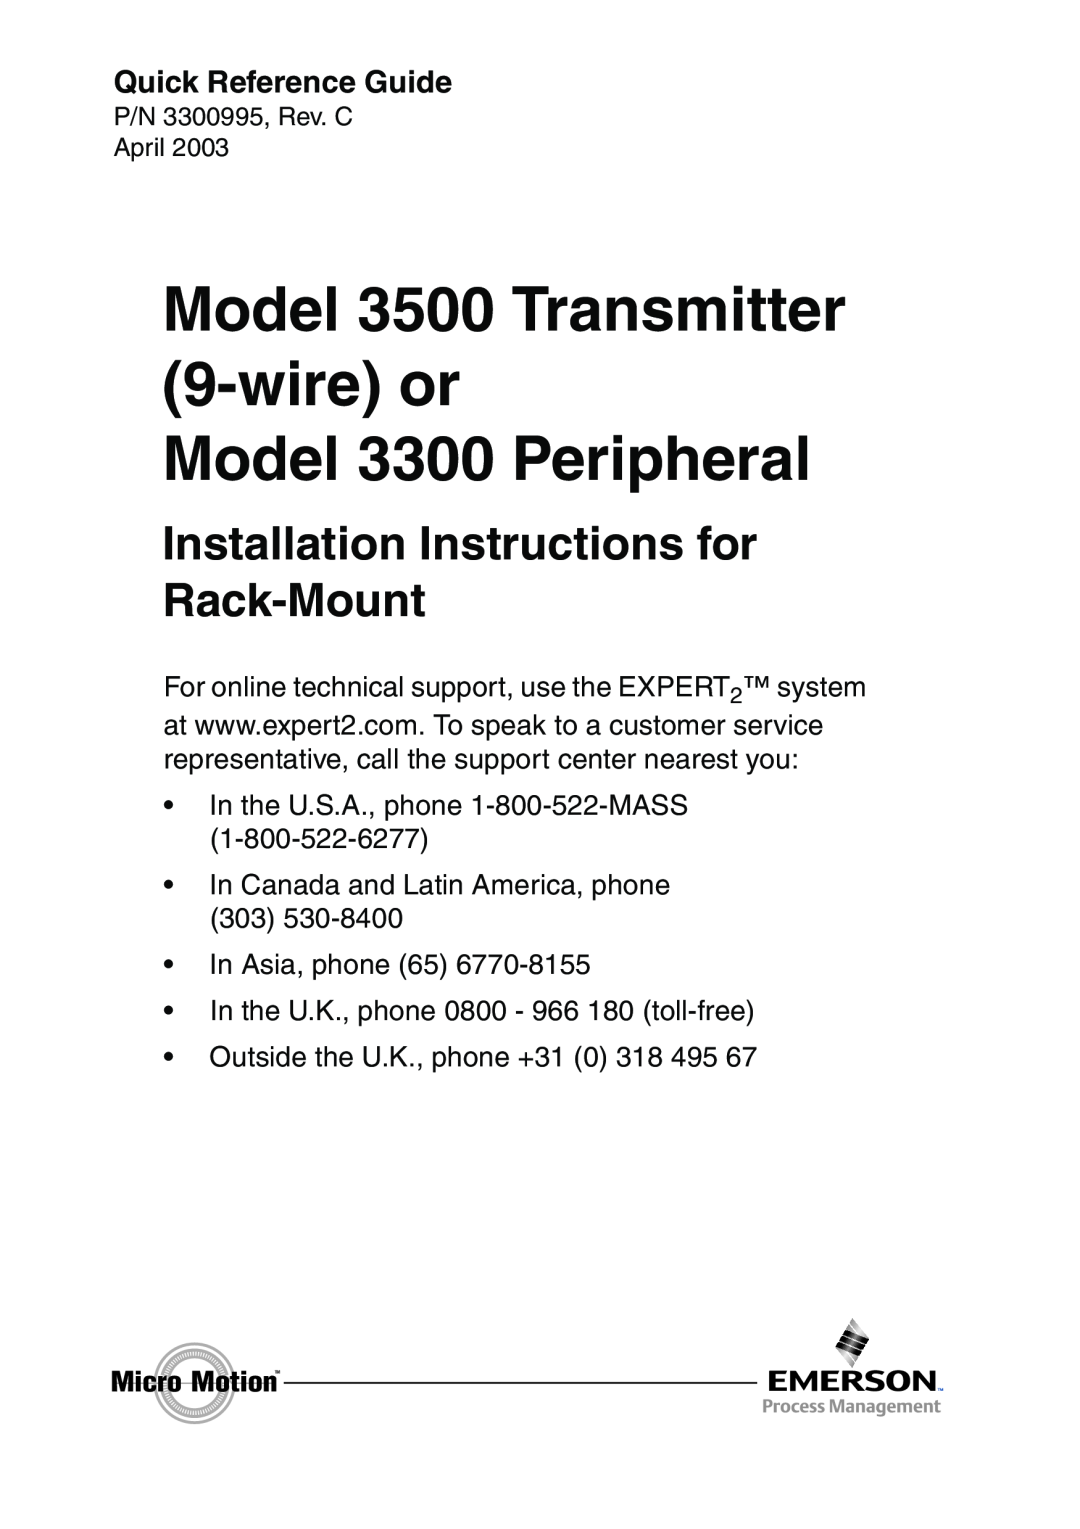 Emerson Process Management installation instructions Model 3500 Transmitter 9-wireor, Model 3300 Peripheral 